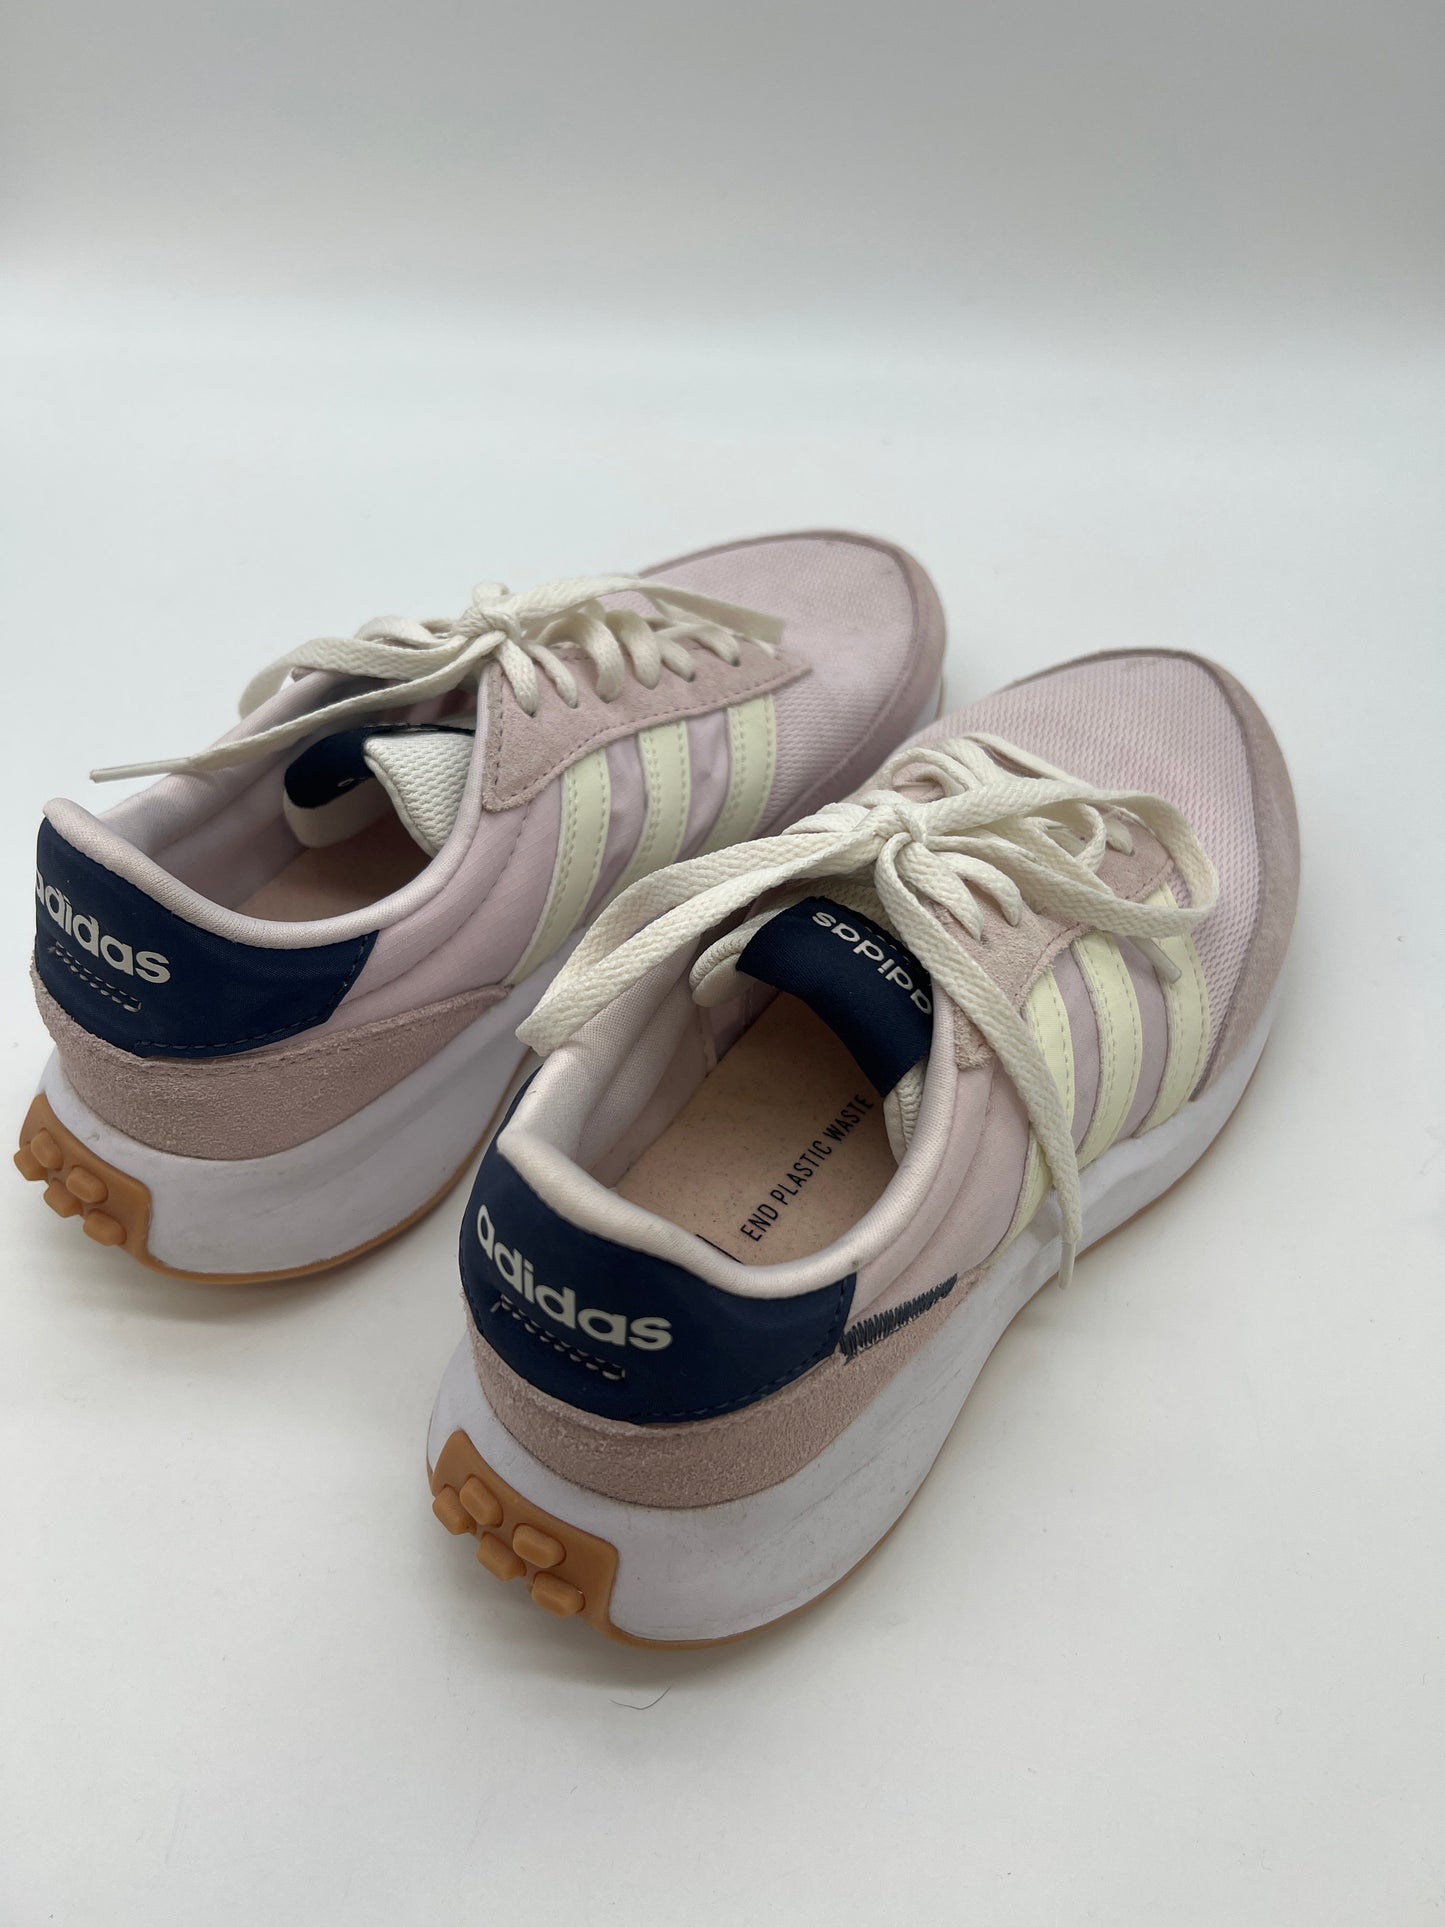 Pink Shoes Athletic Adidas, Size 6.5